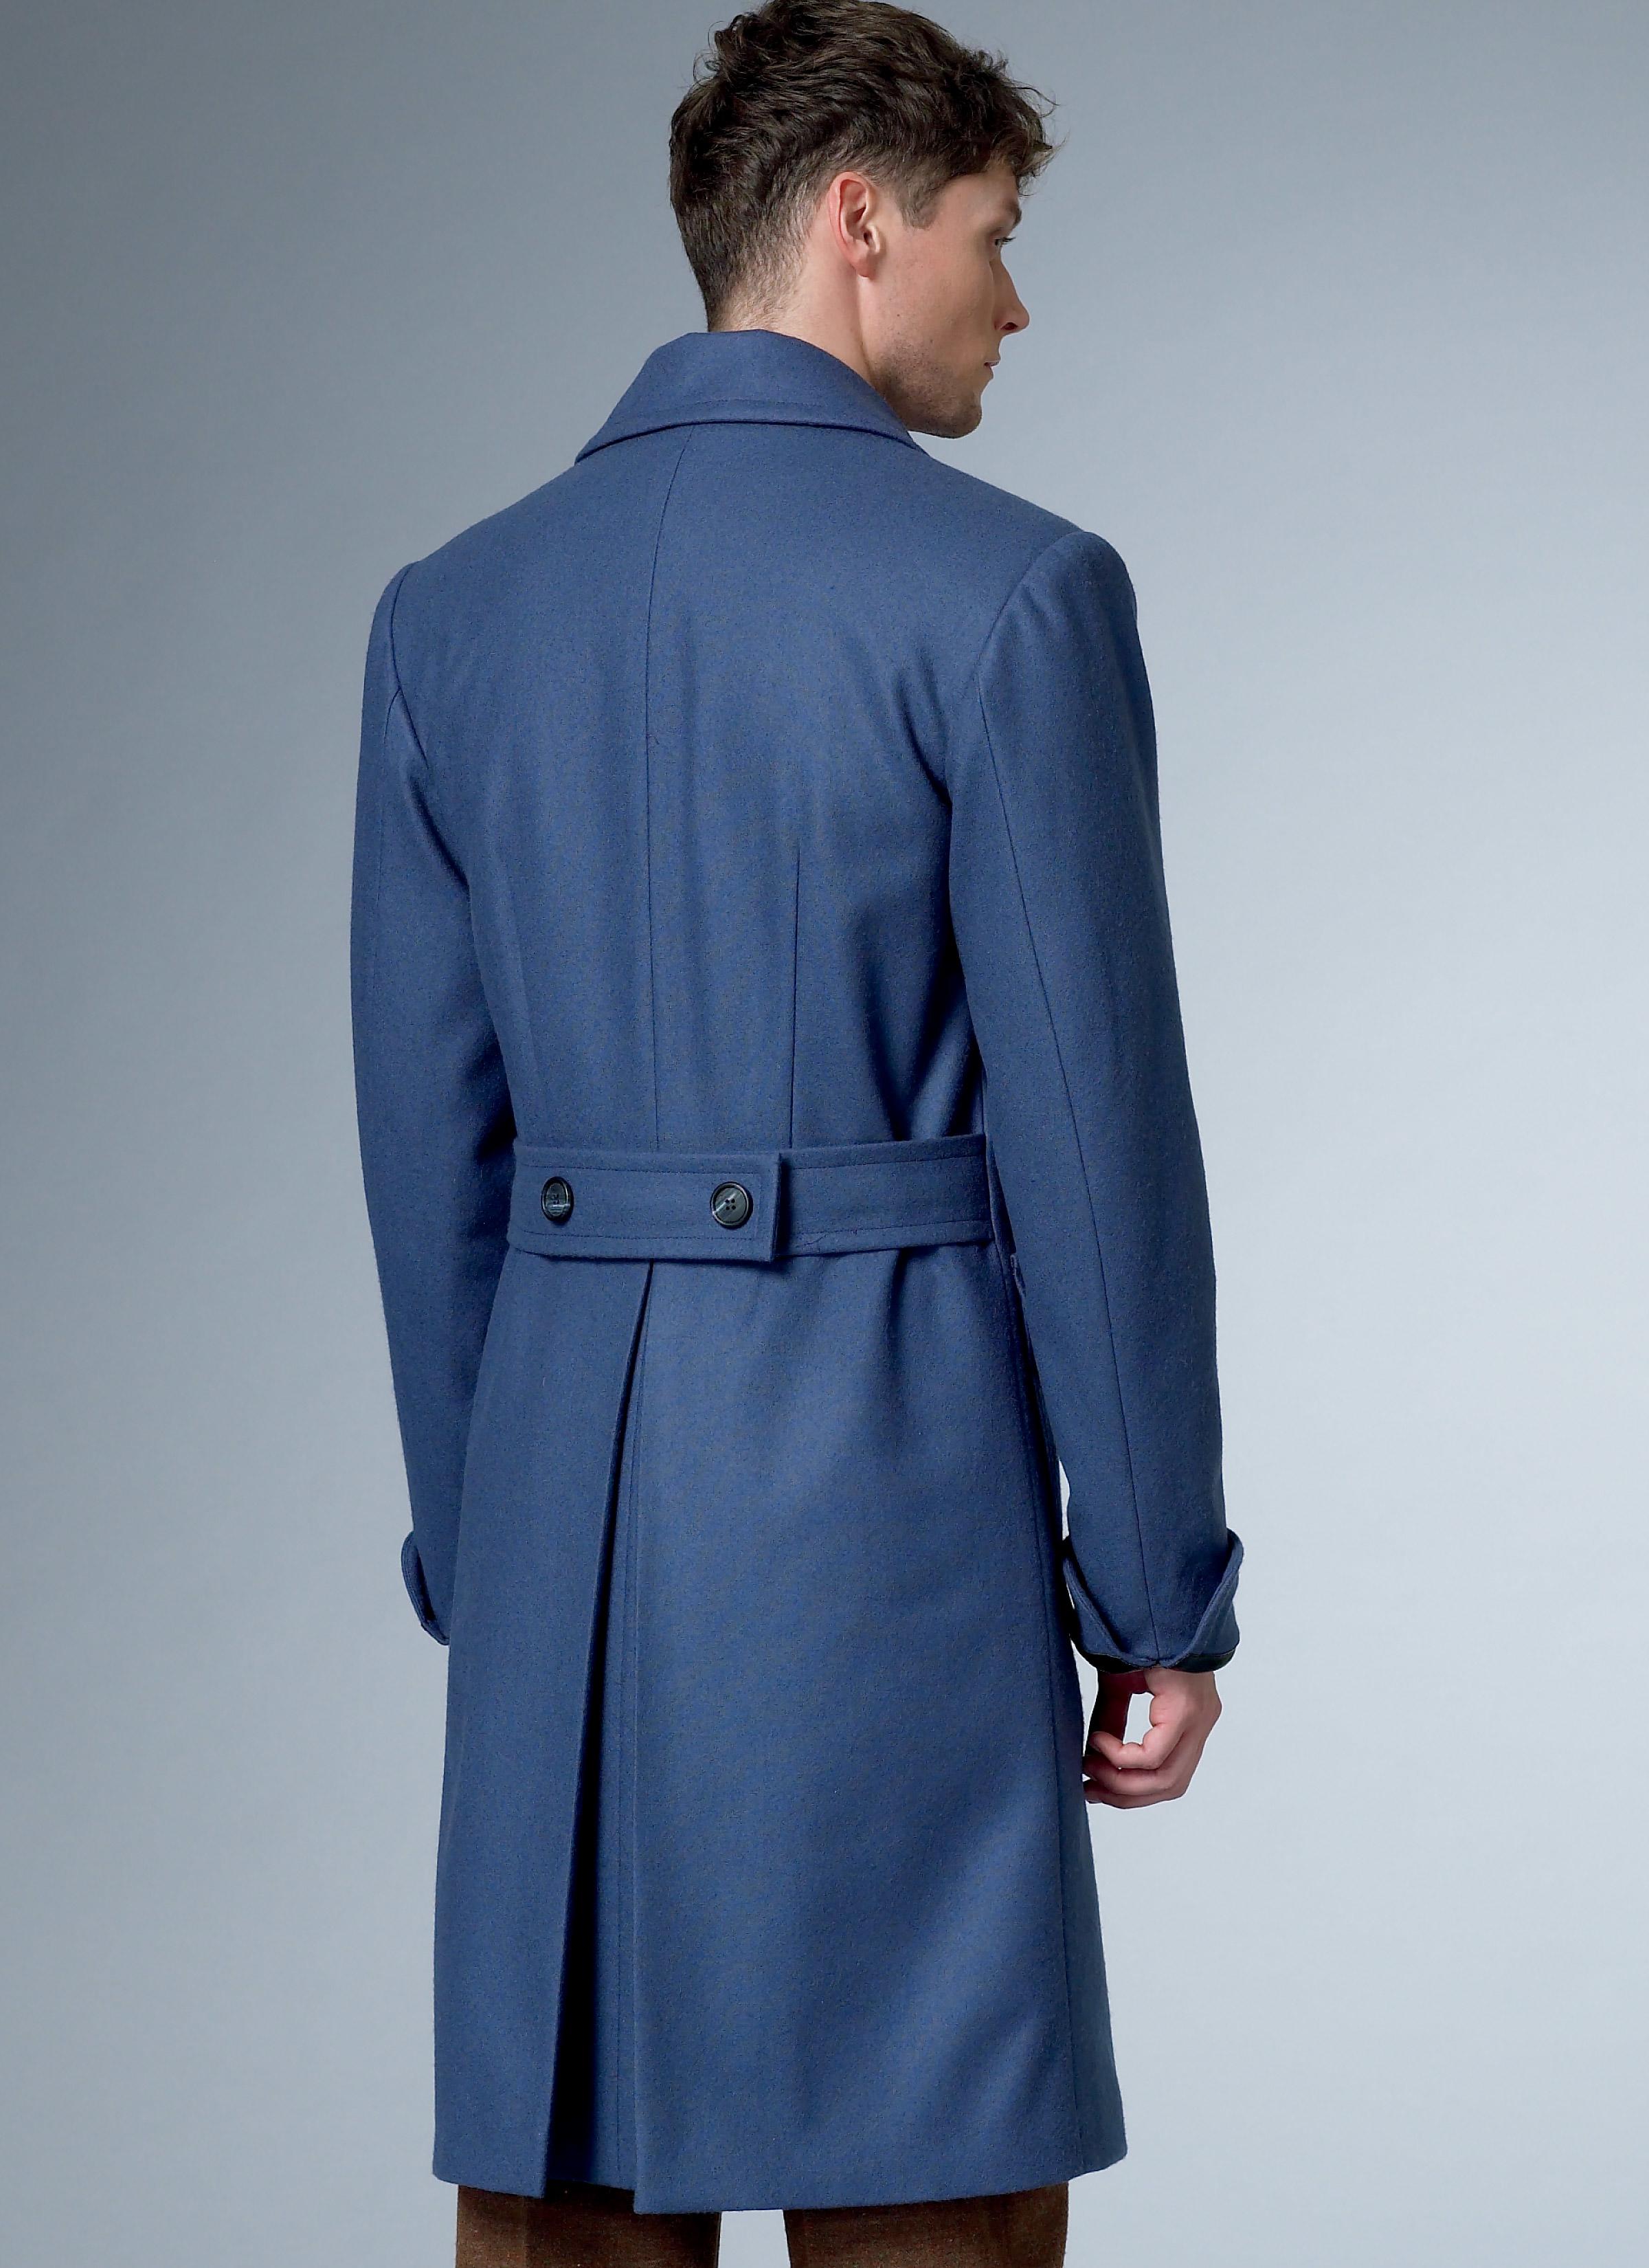 Butterick B6502 Men's Single-Breasted Lined Coat with Back Belt and Vest with Buckle